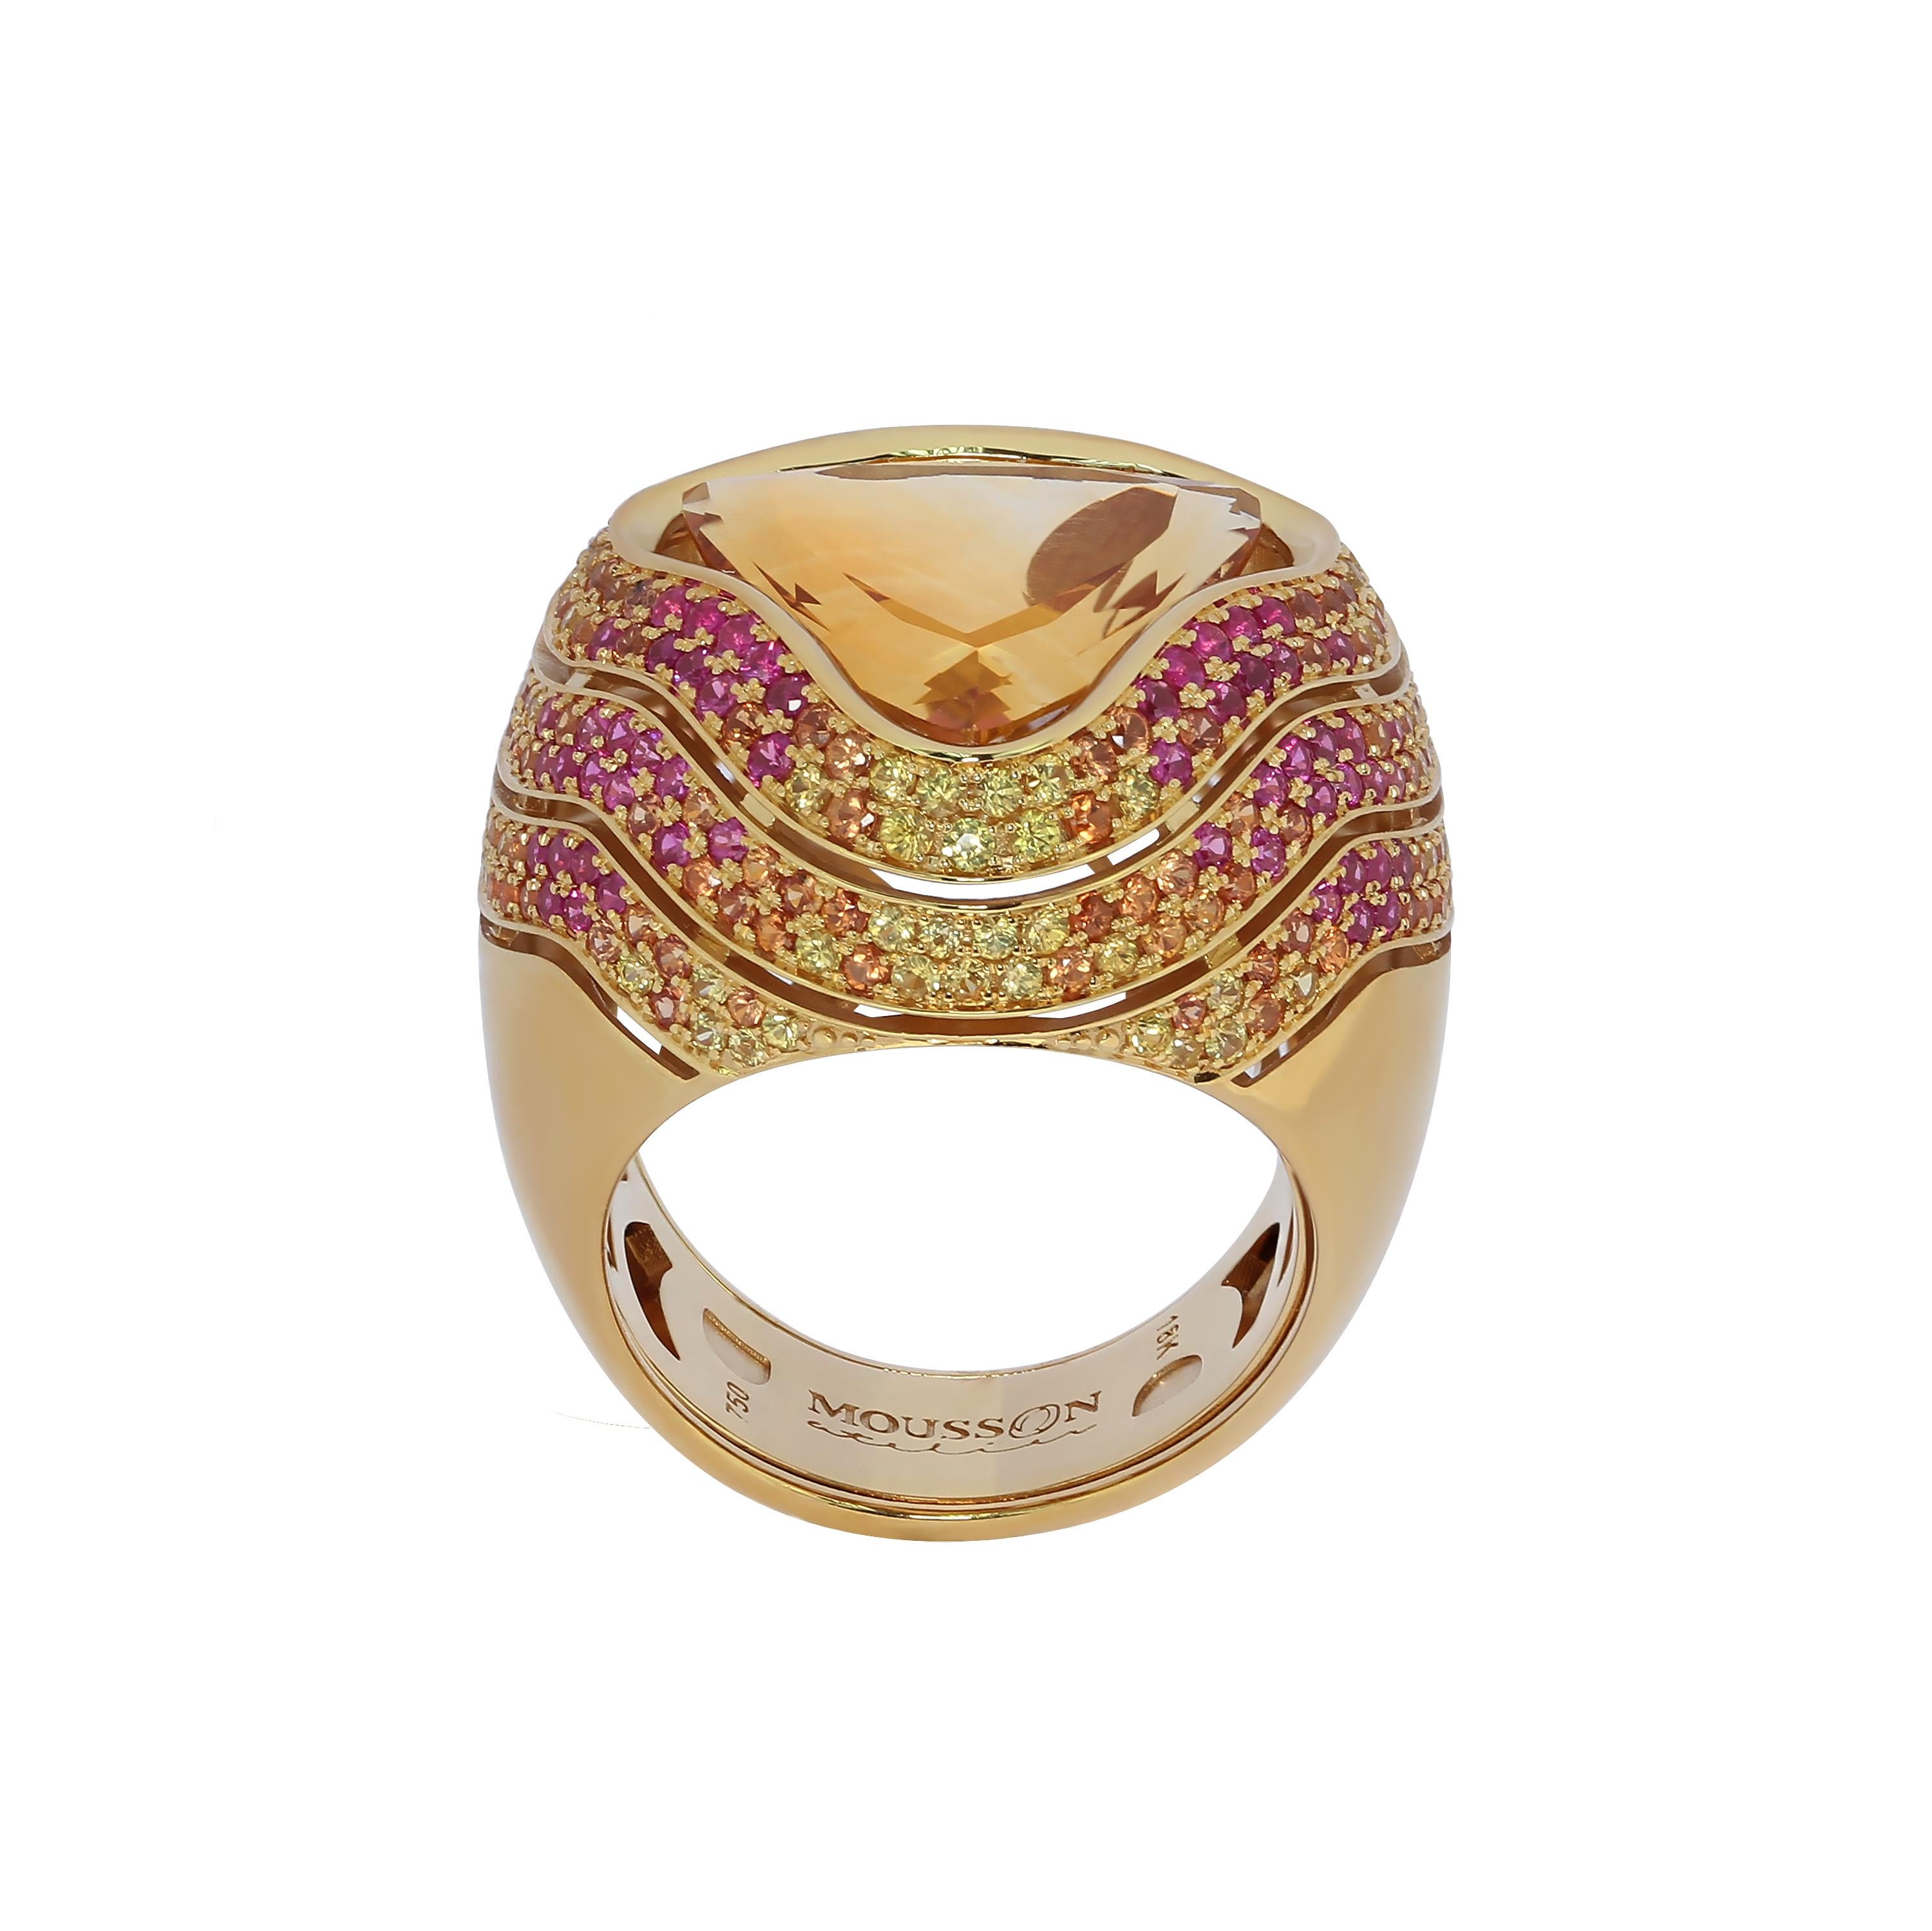 Citrine 7.14 Carat Pink Yellow Orange Sapphire 18 Karat Yellow Gold Ring
Pay attention to the Ring, as we also call it a Wave Ring due to the undulating layers of 18K Yellow Gold around the central stone trillion-shape Citrine weighing 7.14 Ct,